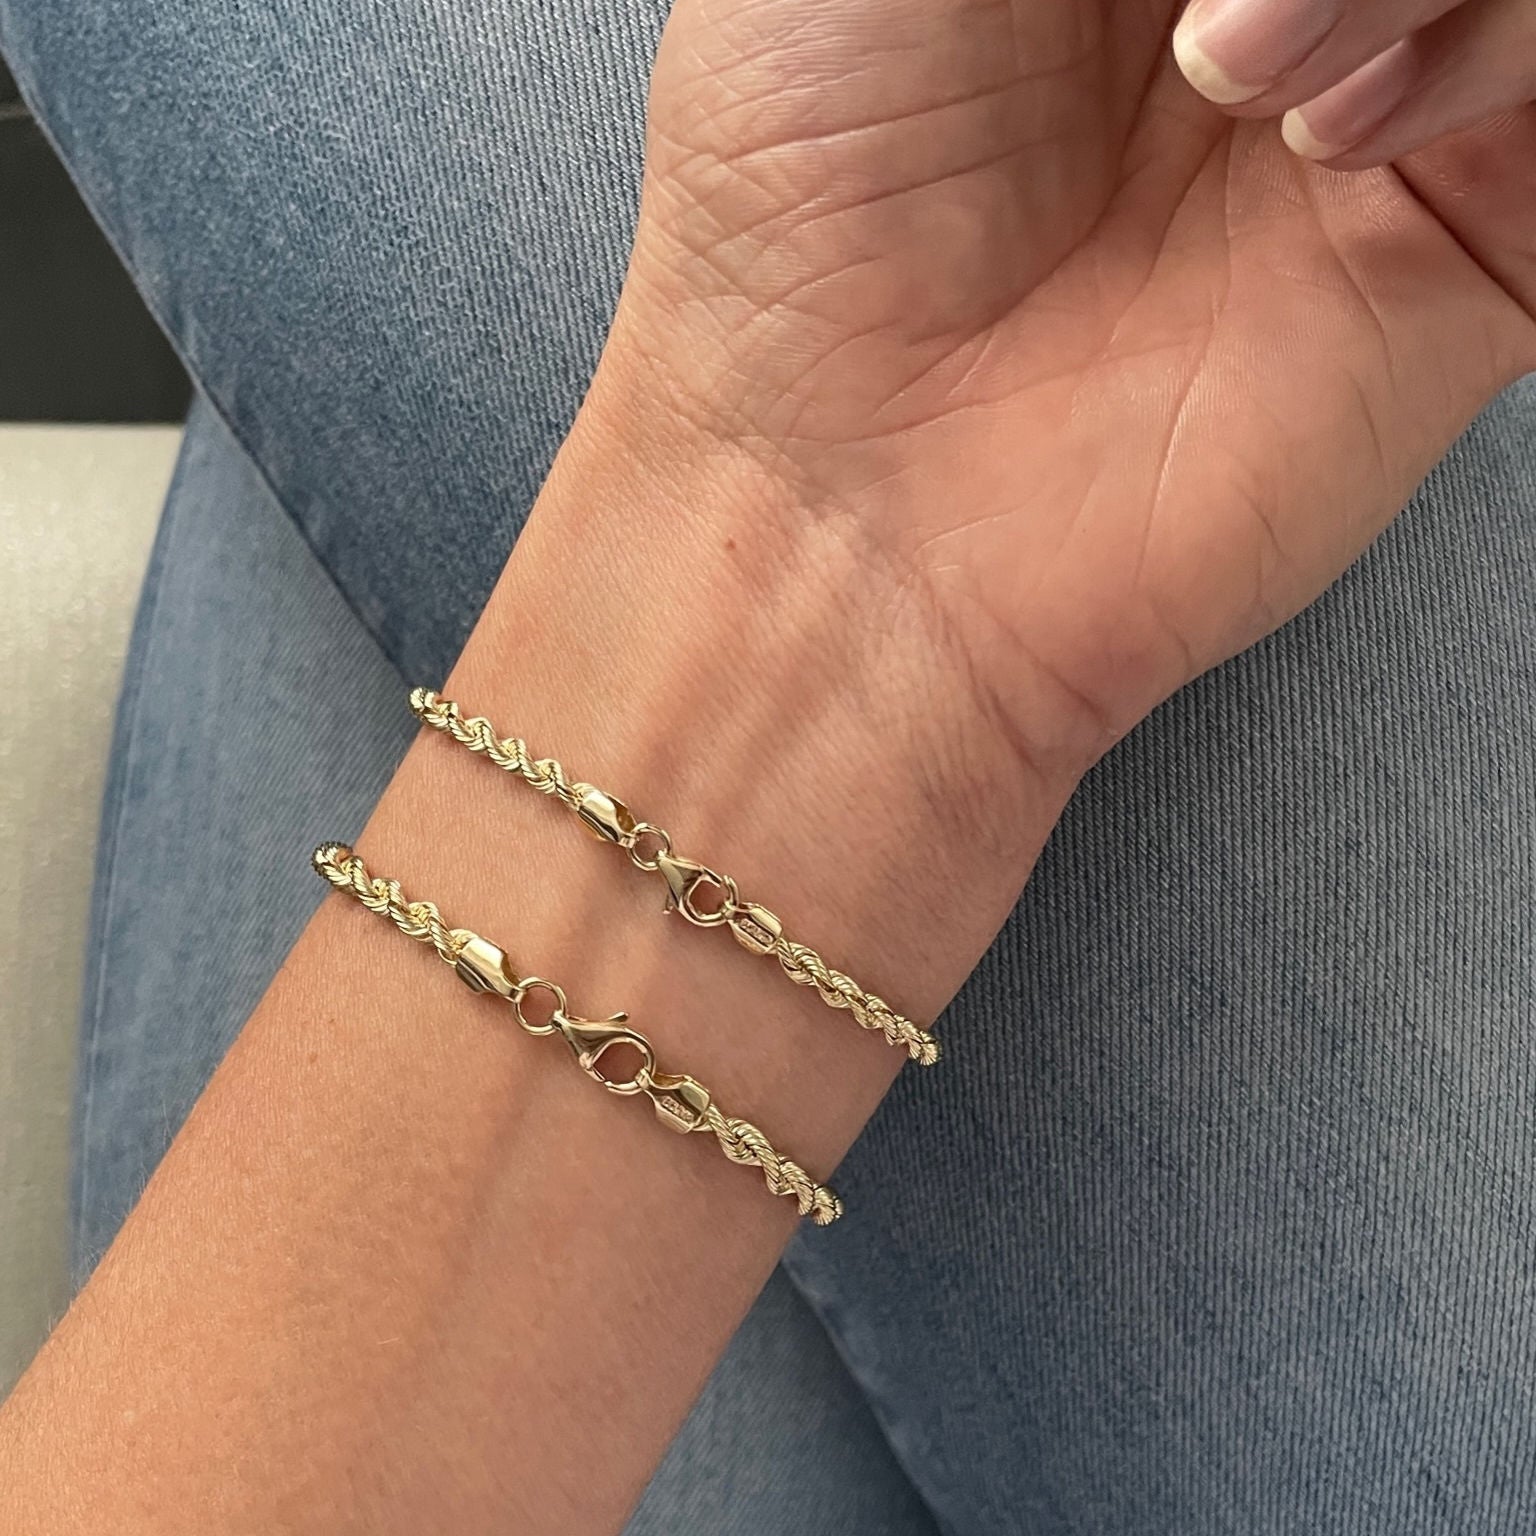 Solid 14k yellow gold rope bracelet